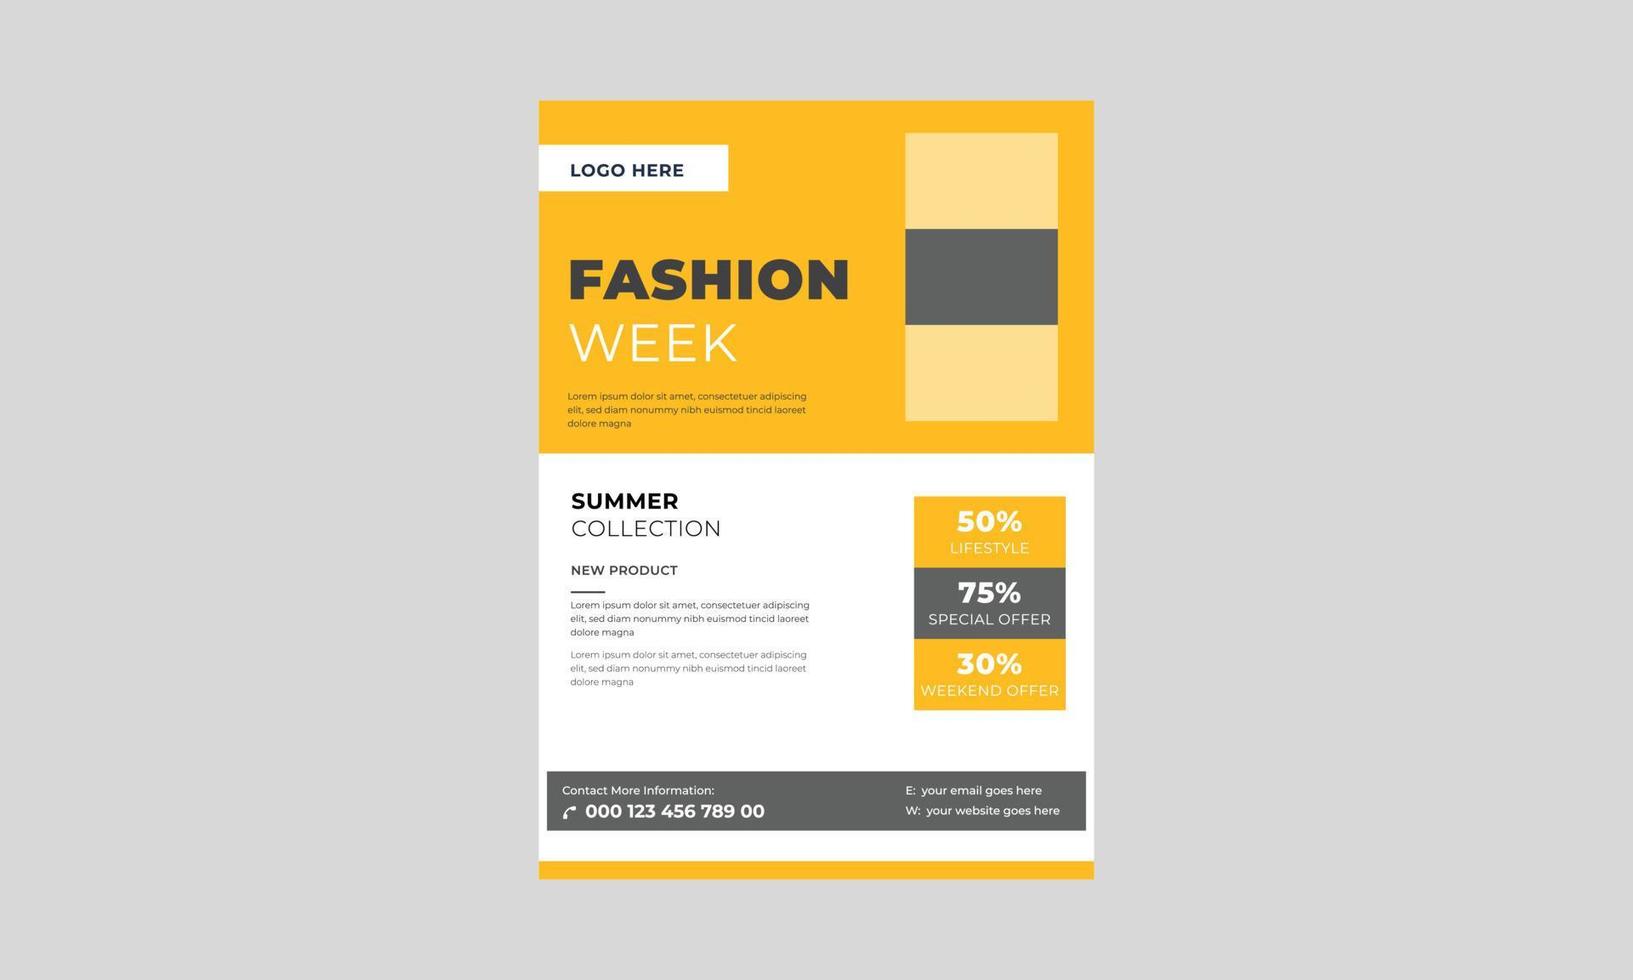 Fashion Show Flyer Template design, Creative Shiny Flyer, Vector stylish Banner, Party Poster and Flyer, Template for Fashion Show